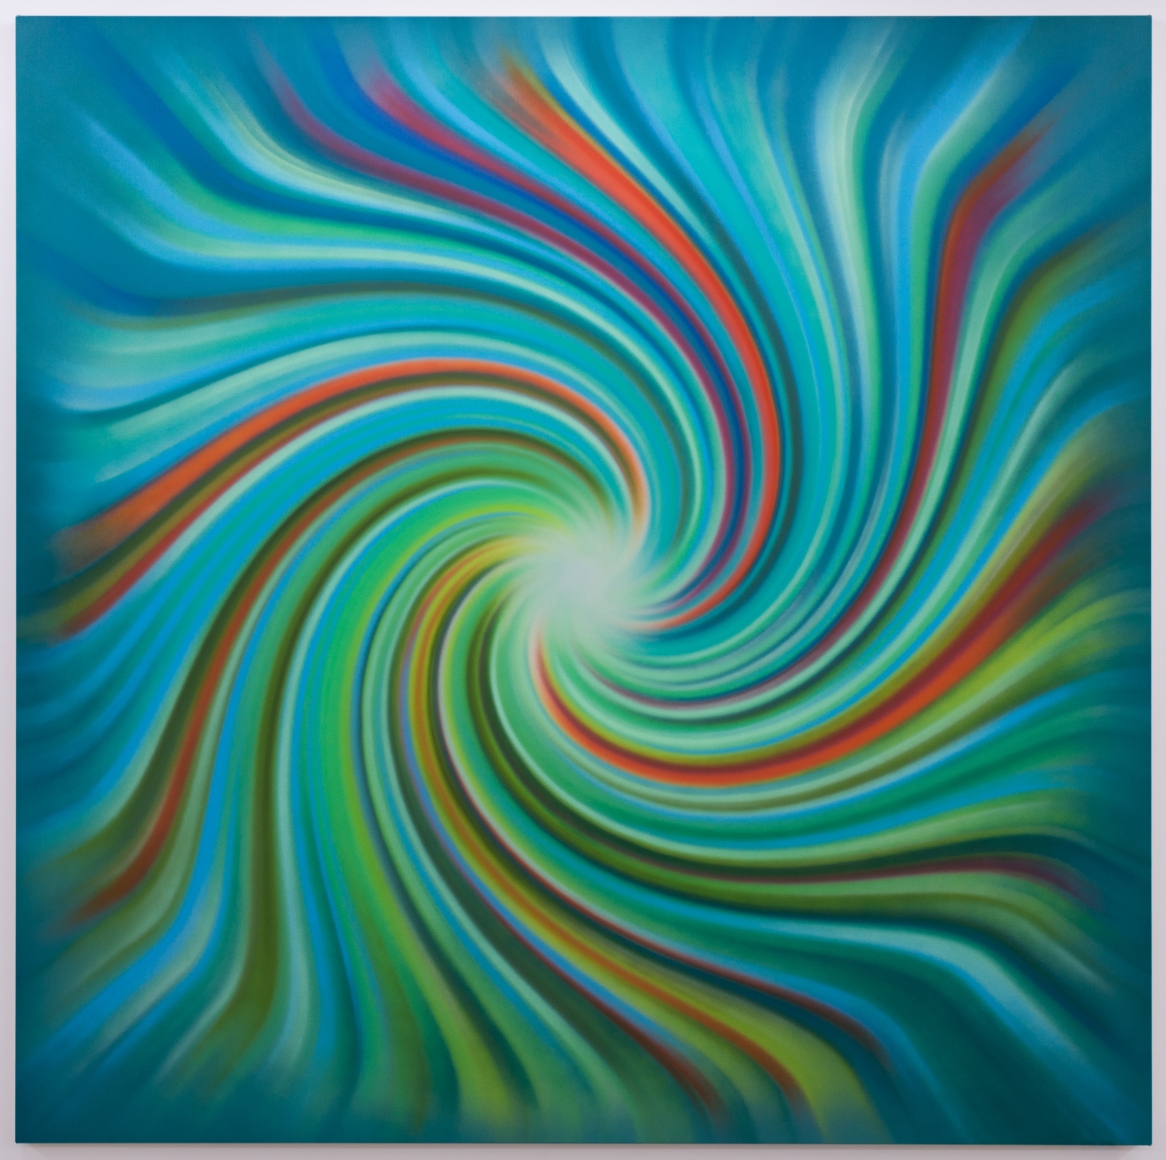 Experienced (Spiral), 2014, Synthetic polymer on canvas